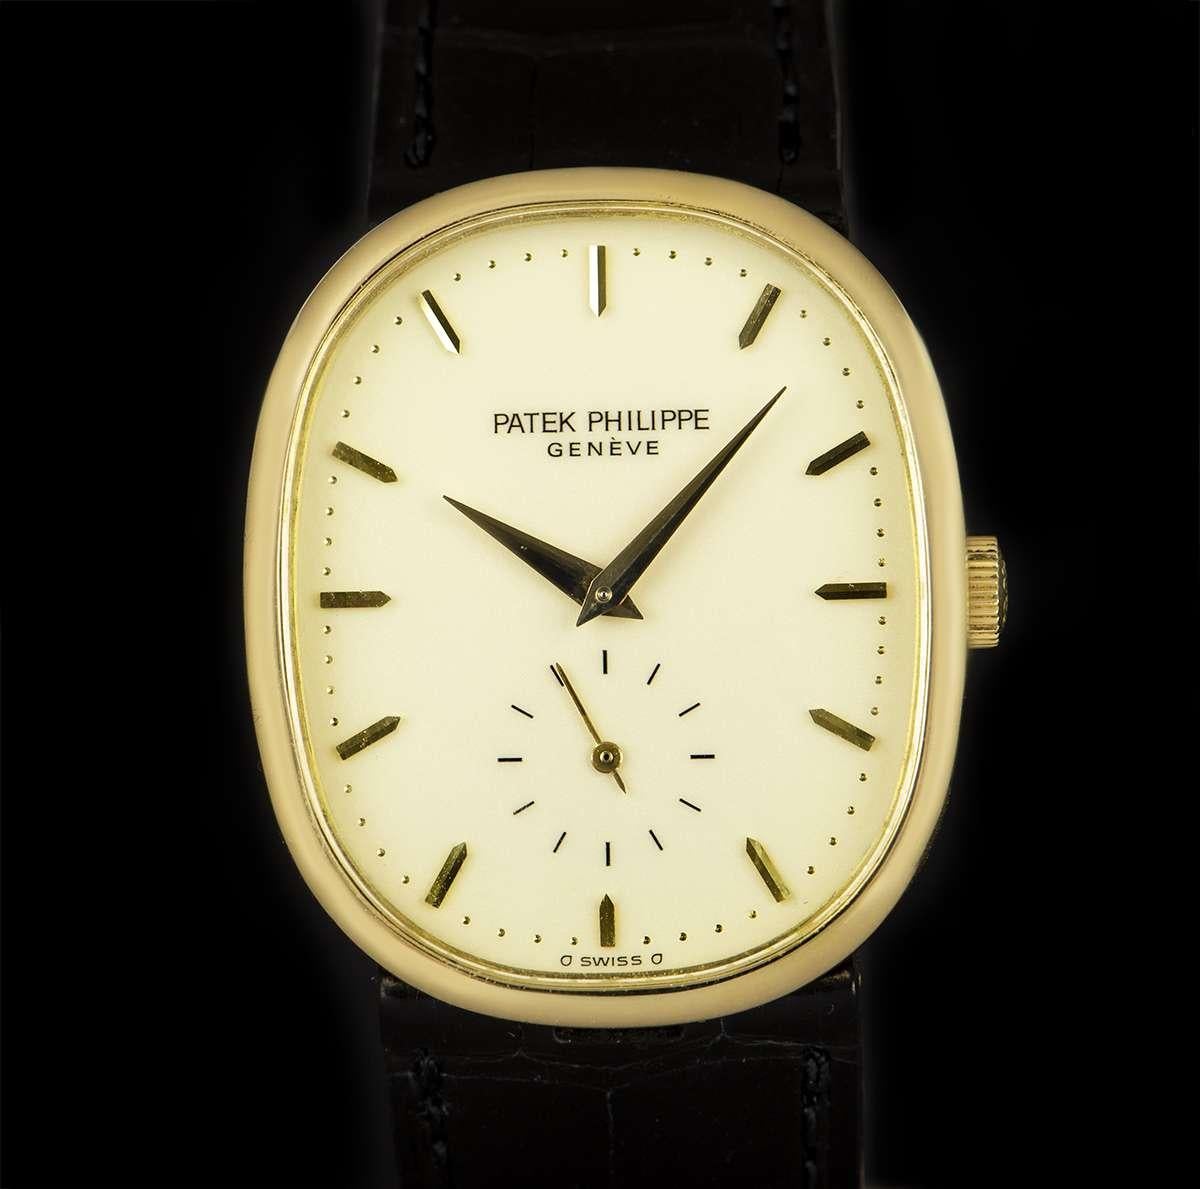 An 18k Yellow Gold 27mm Ellipse Vintage Men's Wristwatch, cream enamel dial with applied hour markers, small seconds at 6 0'clock, a fixed 18k yellow gold bezel, a brand new original black leather strap with an original 18k yellow gold pin buckle,